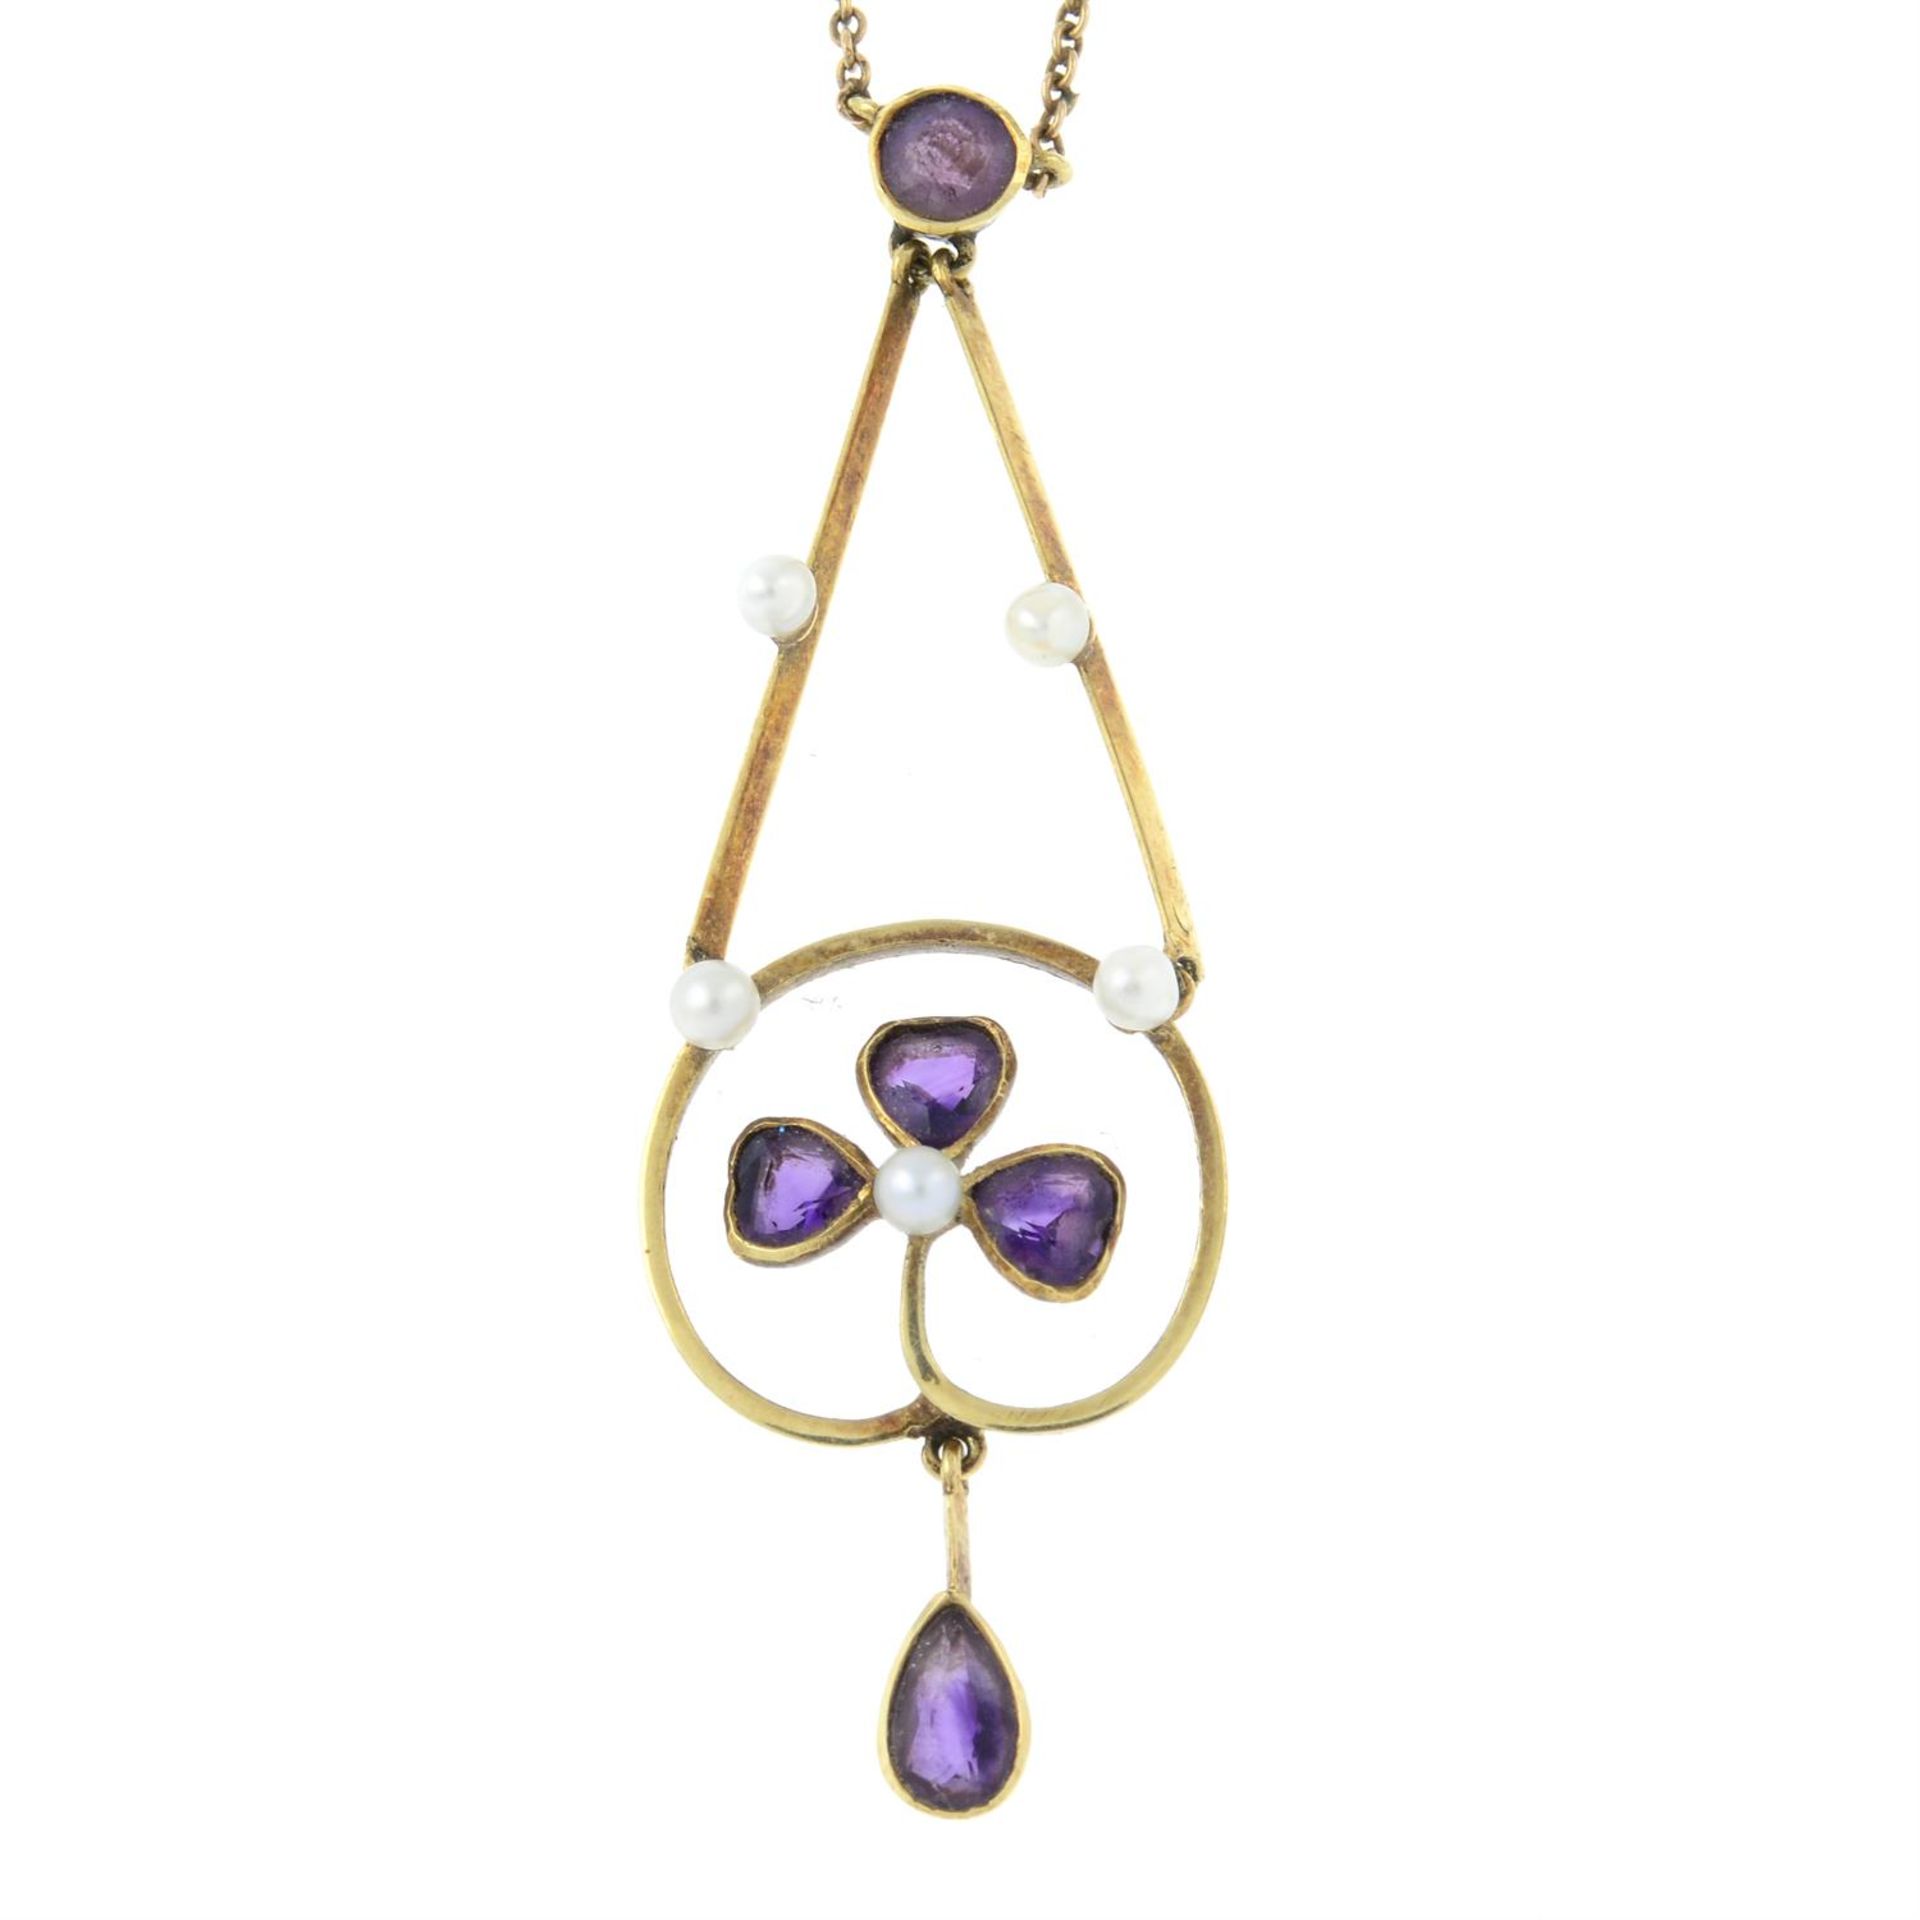 An early 20th century gold amethyst and seed pearl foliate pendant, on integral chain.